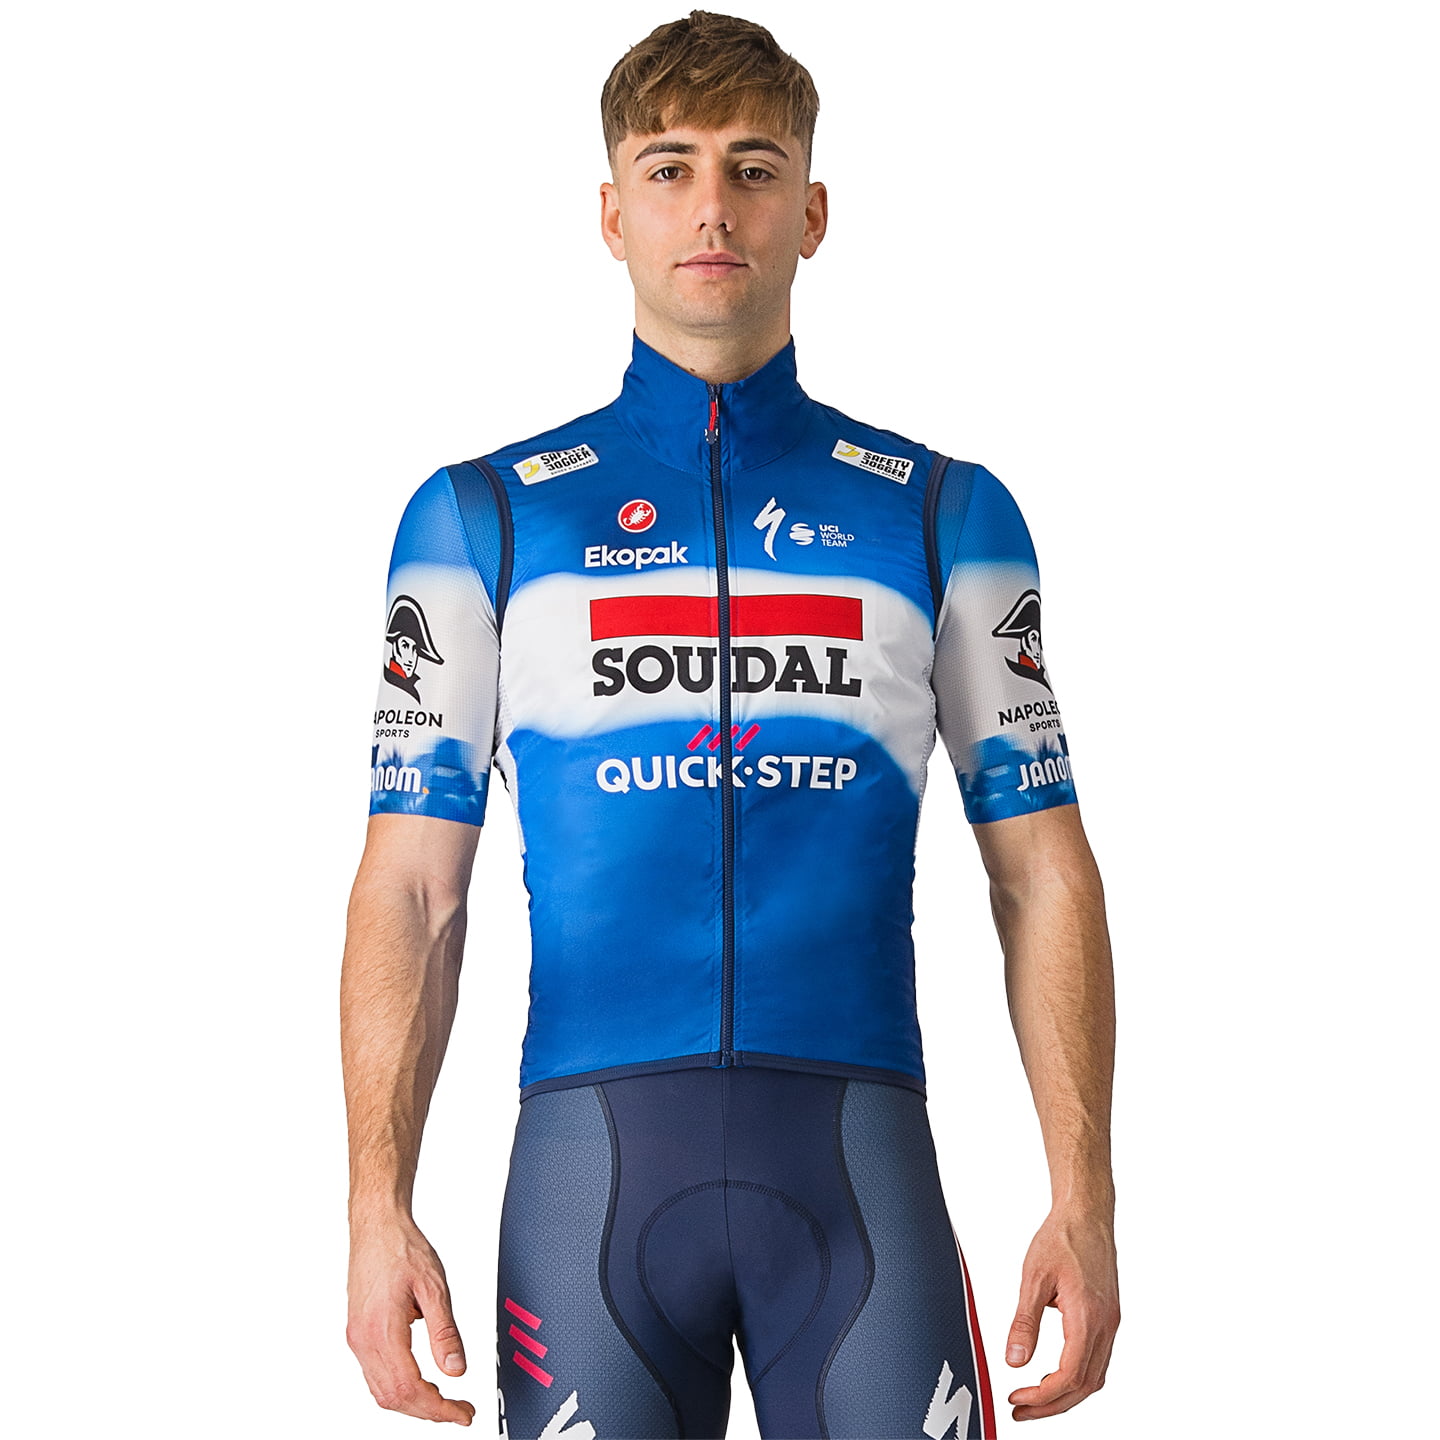 SOUDAL QUICK-STEP 2024 Wind Vest, for men, size S, Cycling vest, Cycling clothing